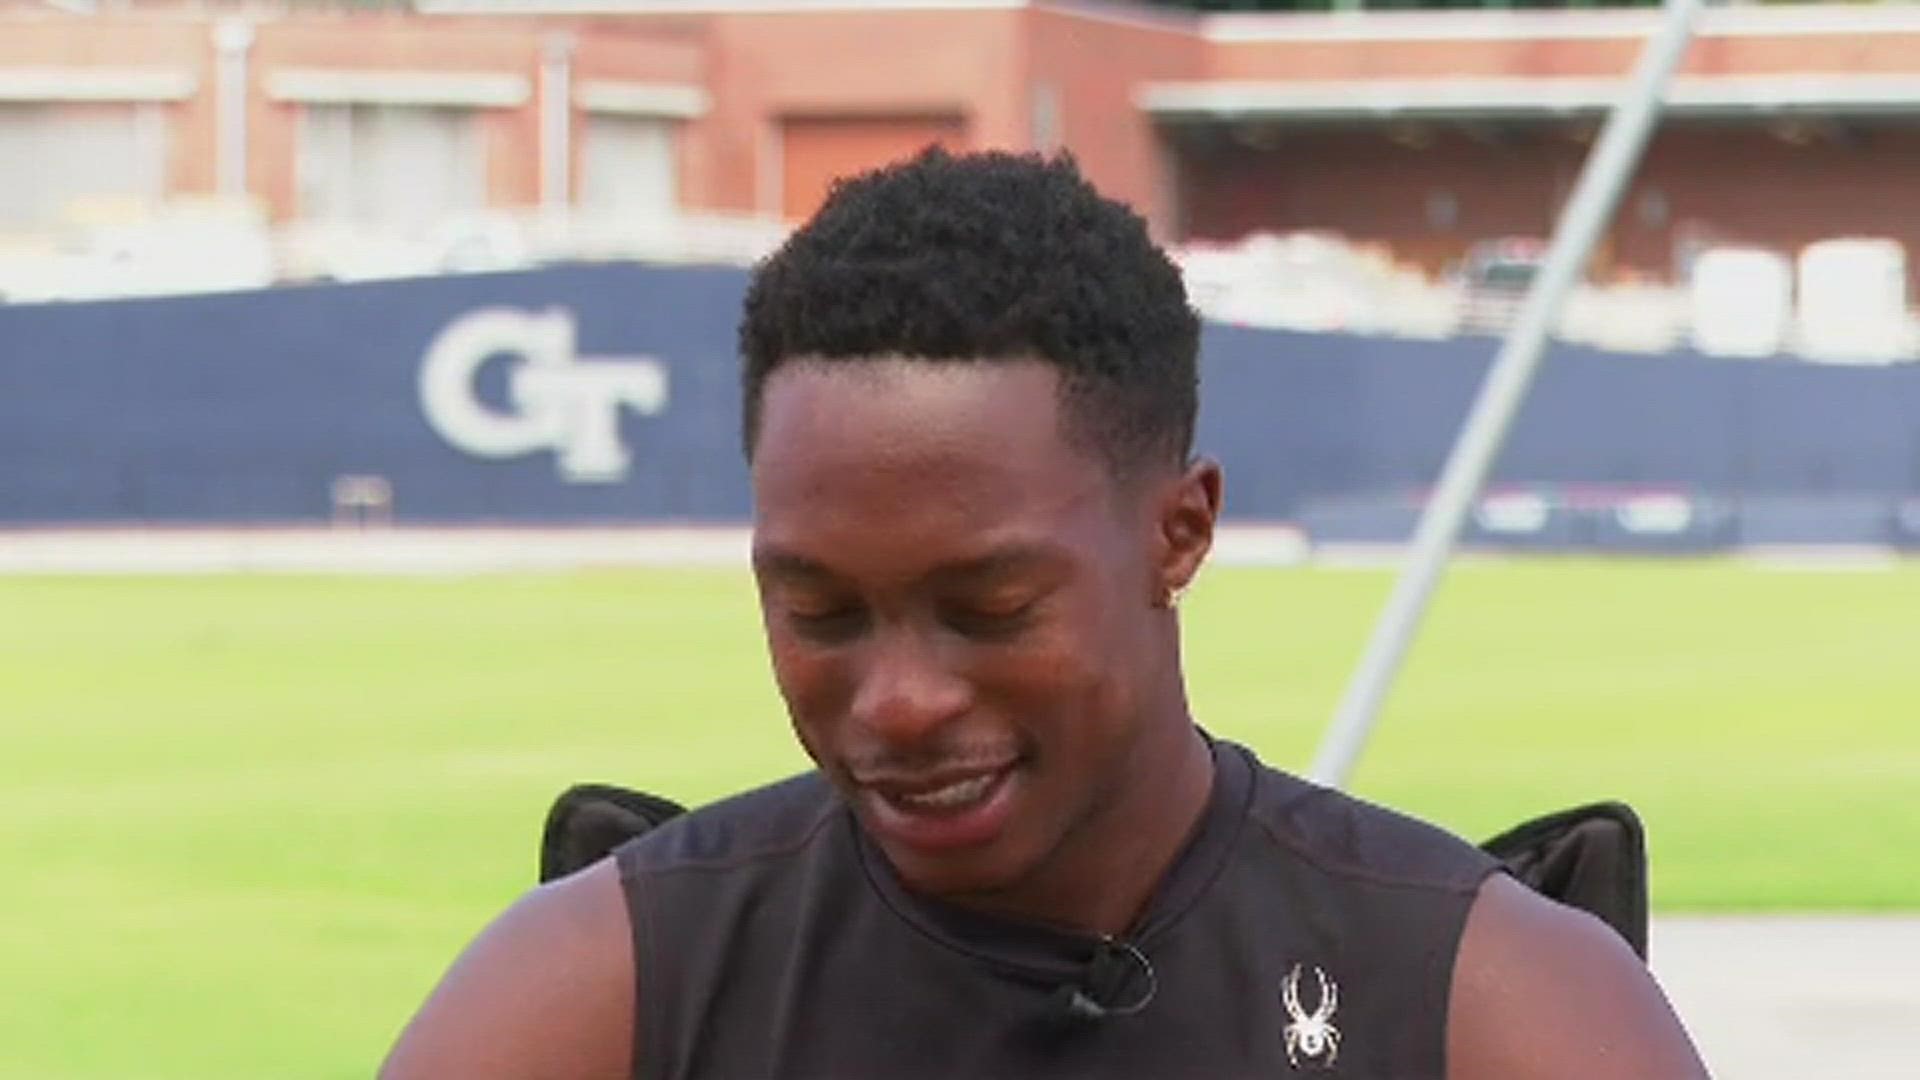 Georgia native Kenny Selmon is making his Olympic debut in Tokyo. Get to know the 24-year-old track athlete as he shares his story with 11Alive's Cheryl Preheim.